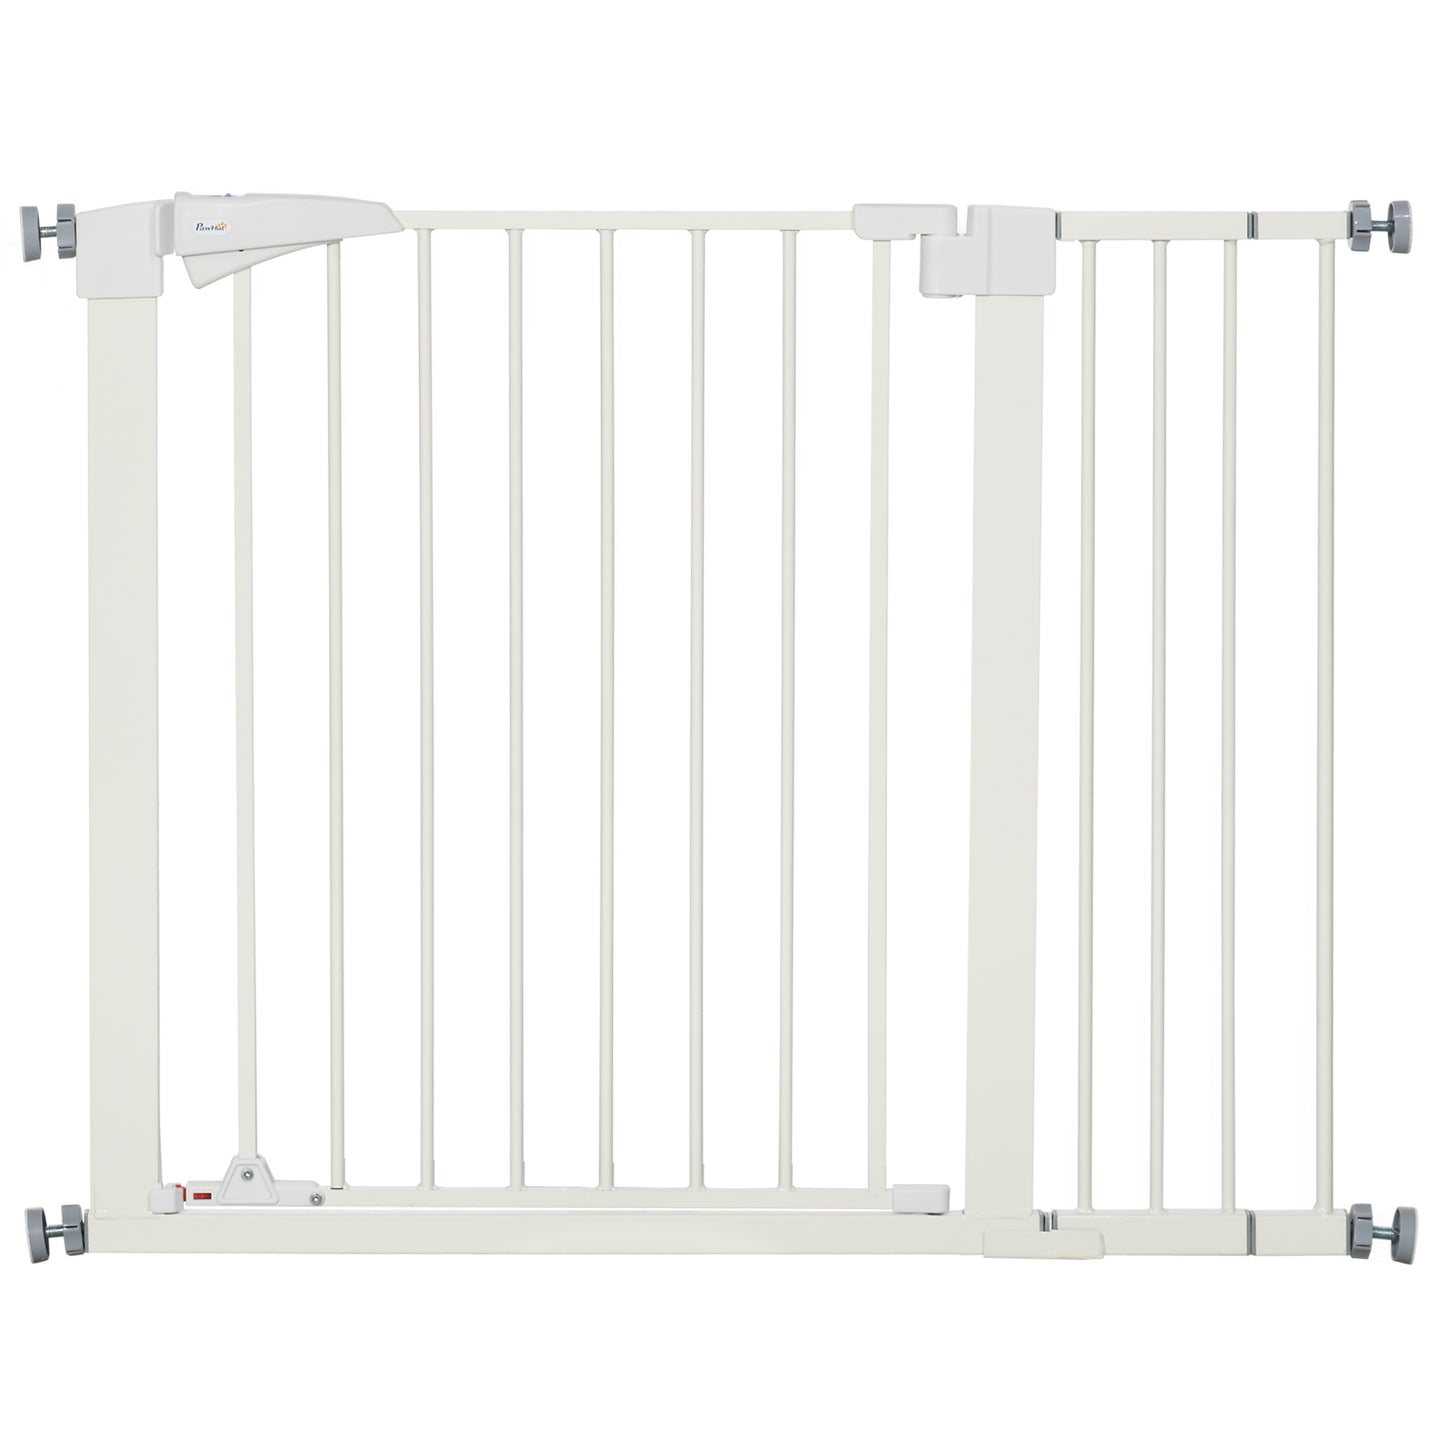 29.5" - 32" Dog Gate for Doorways Stairs with Luminous Handle, Pressure Mount Safety Gate for Easy Step with Auto Close, Walk Through Pet Gate for Small and Medium Dogs